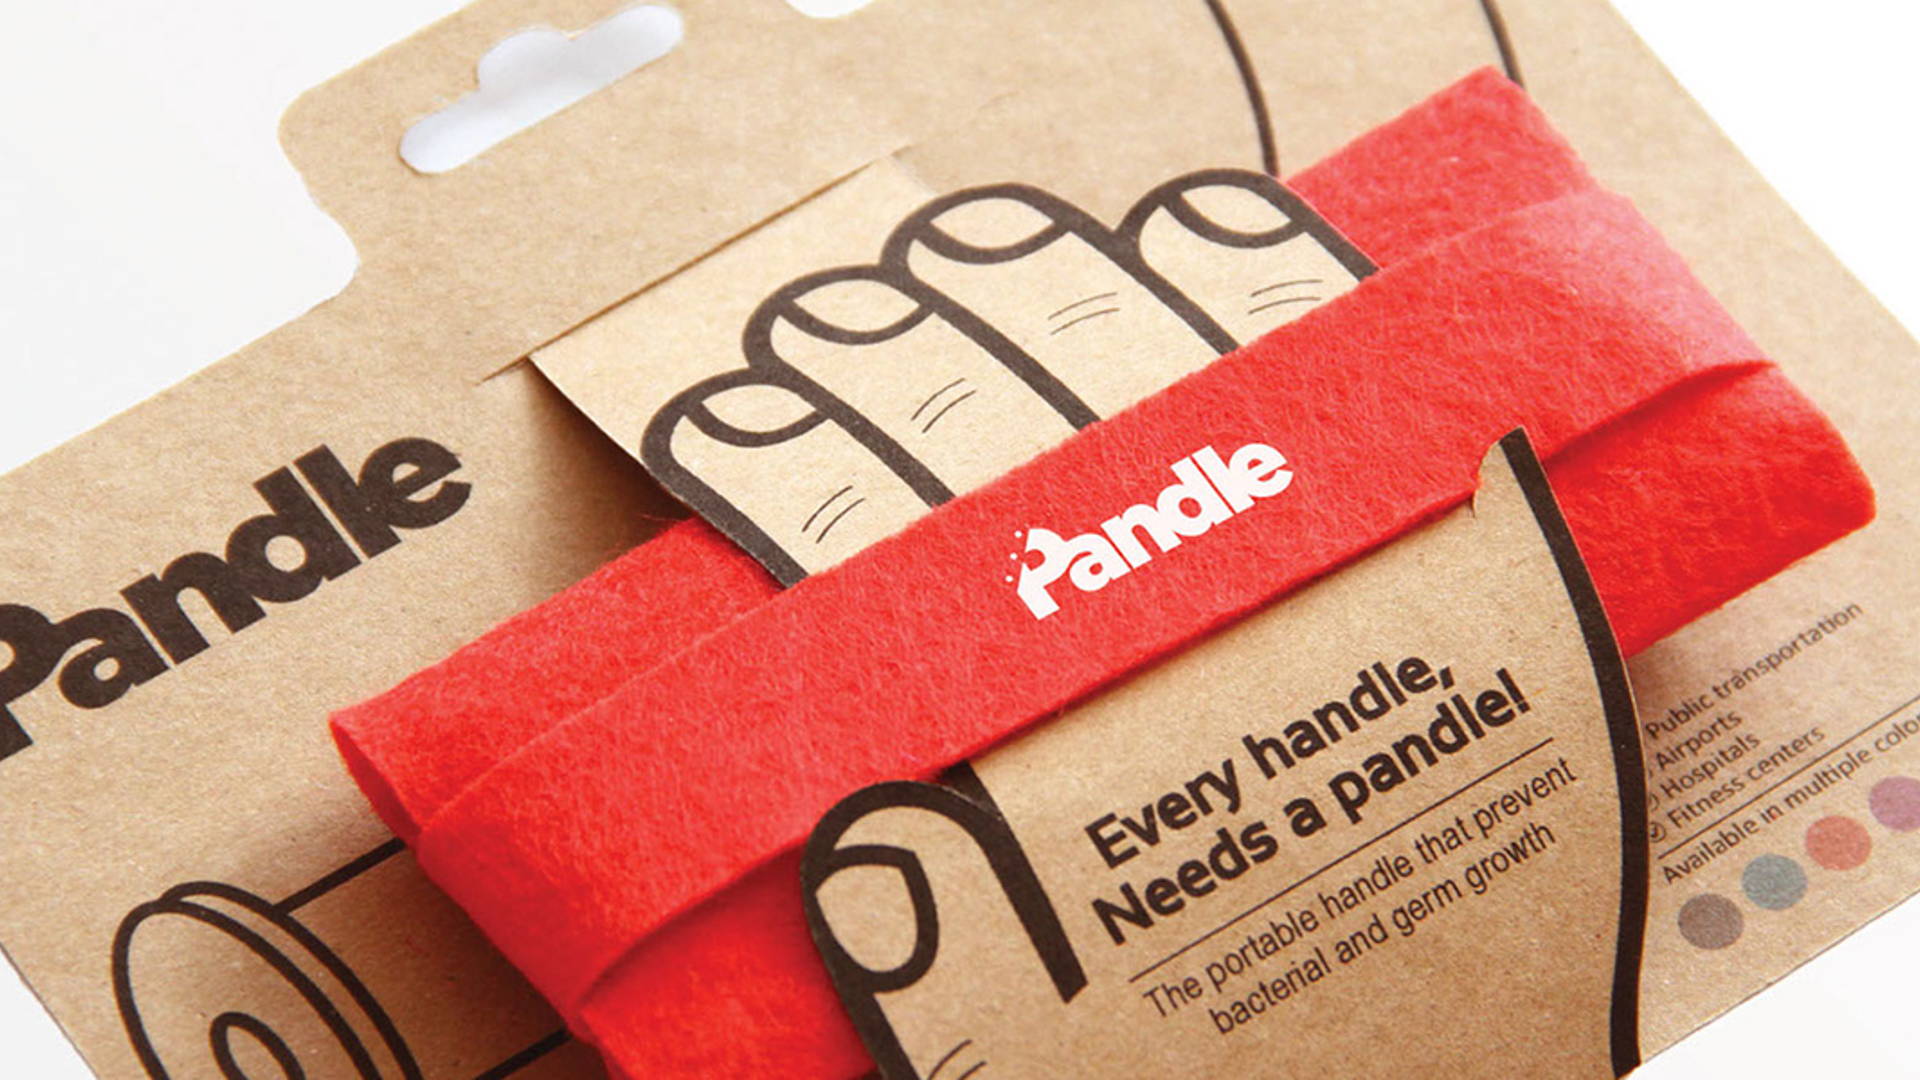 Featured image for Pandle: Repackaging